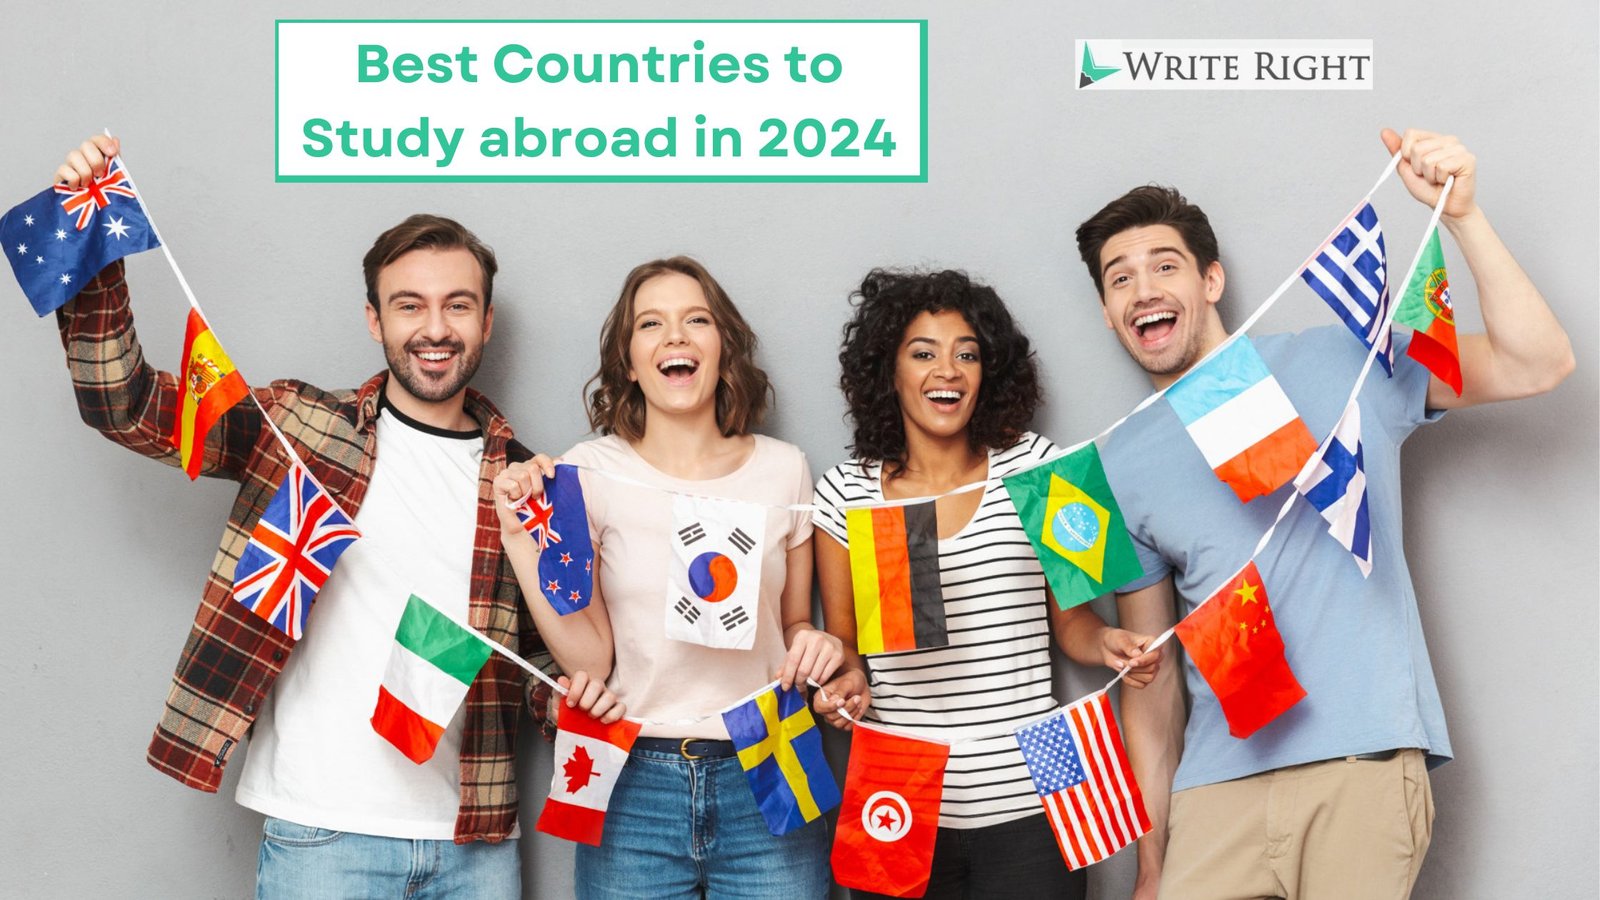 Which are the best countries to study abroad in 2024?